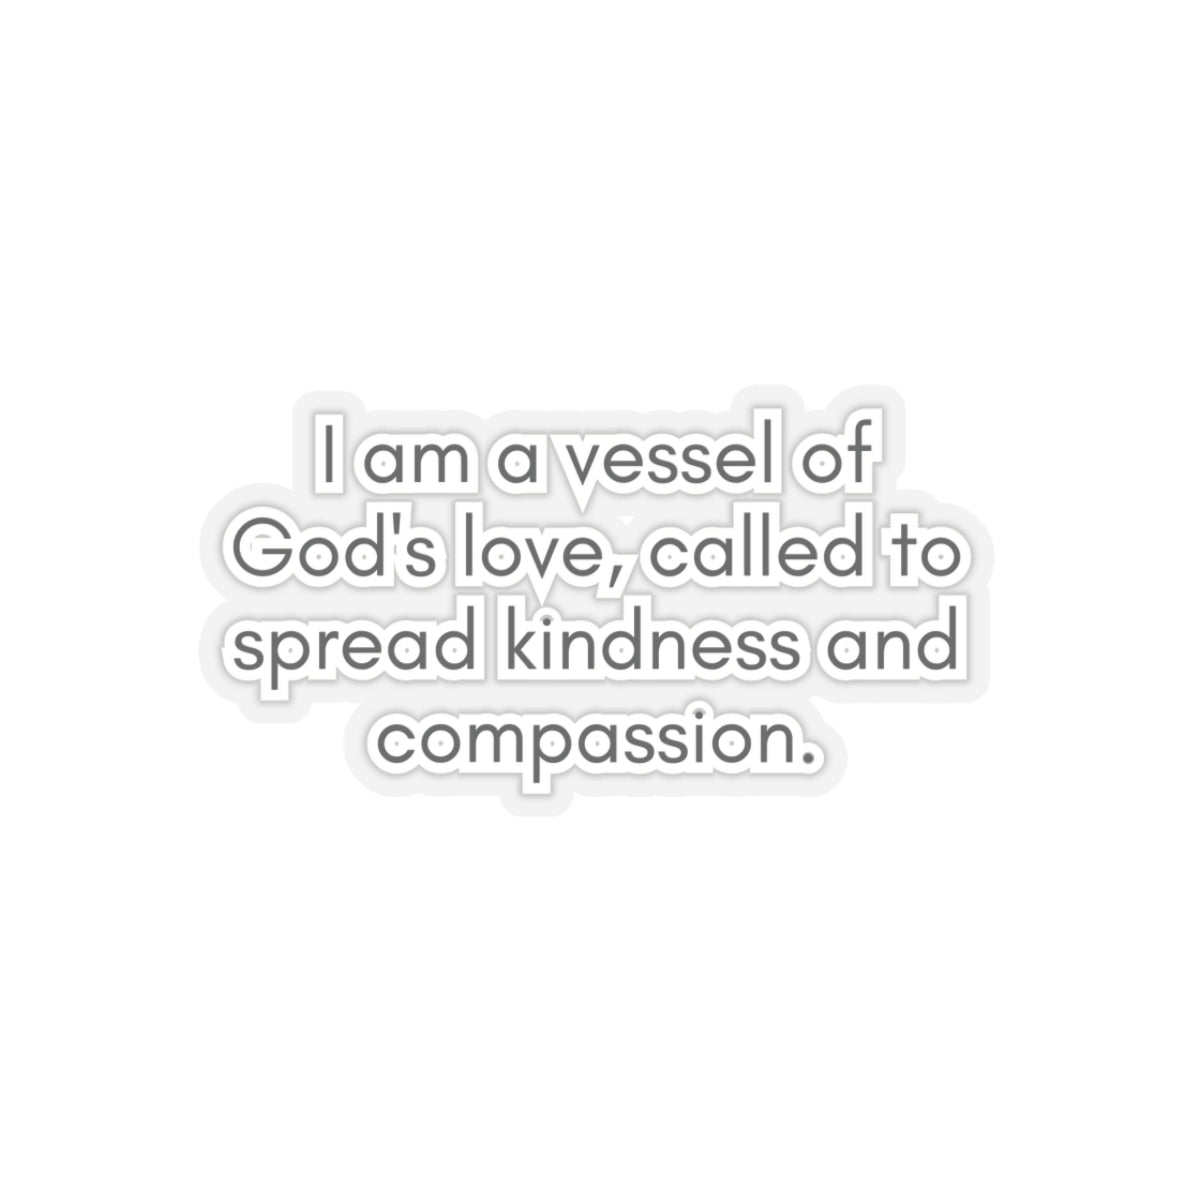 I Am A Vessel Of God's Love... Inspirational Quote Kiss-Cut Stickers-Paper products-3" × 3"-Transparent-mysticalcherry